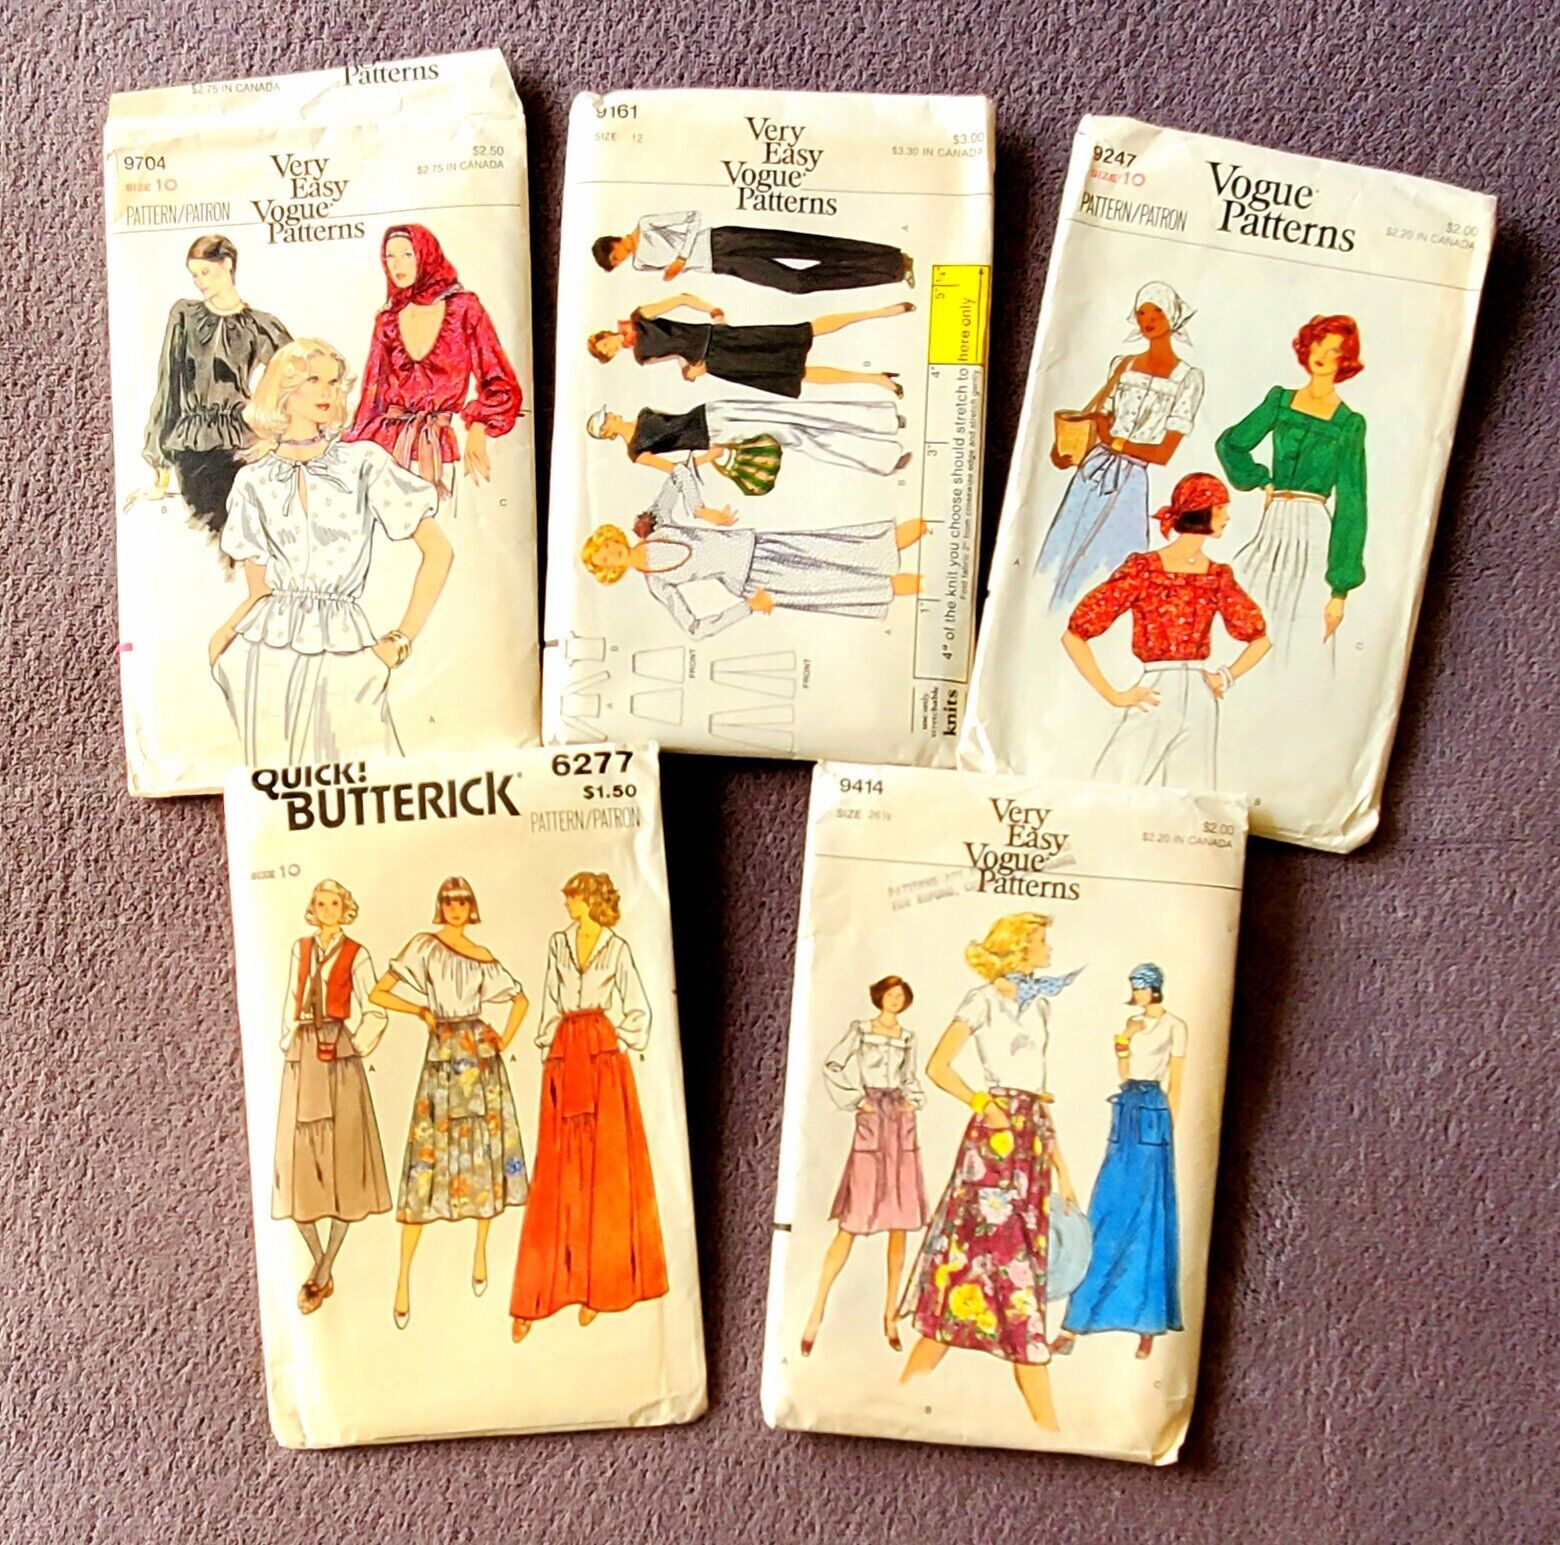 Variety Pack of Vogue and Butterick Sewing Patterns - Various Sizes